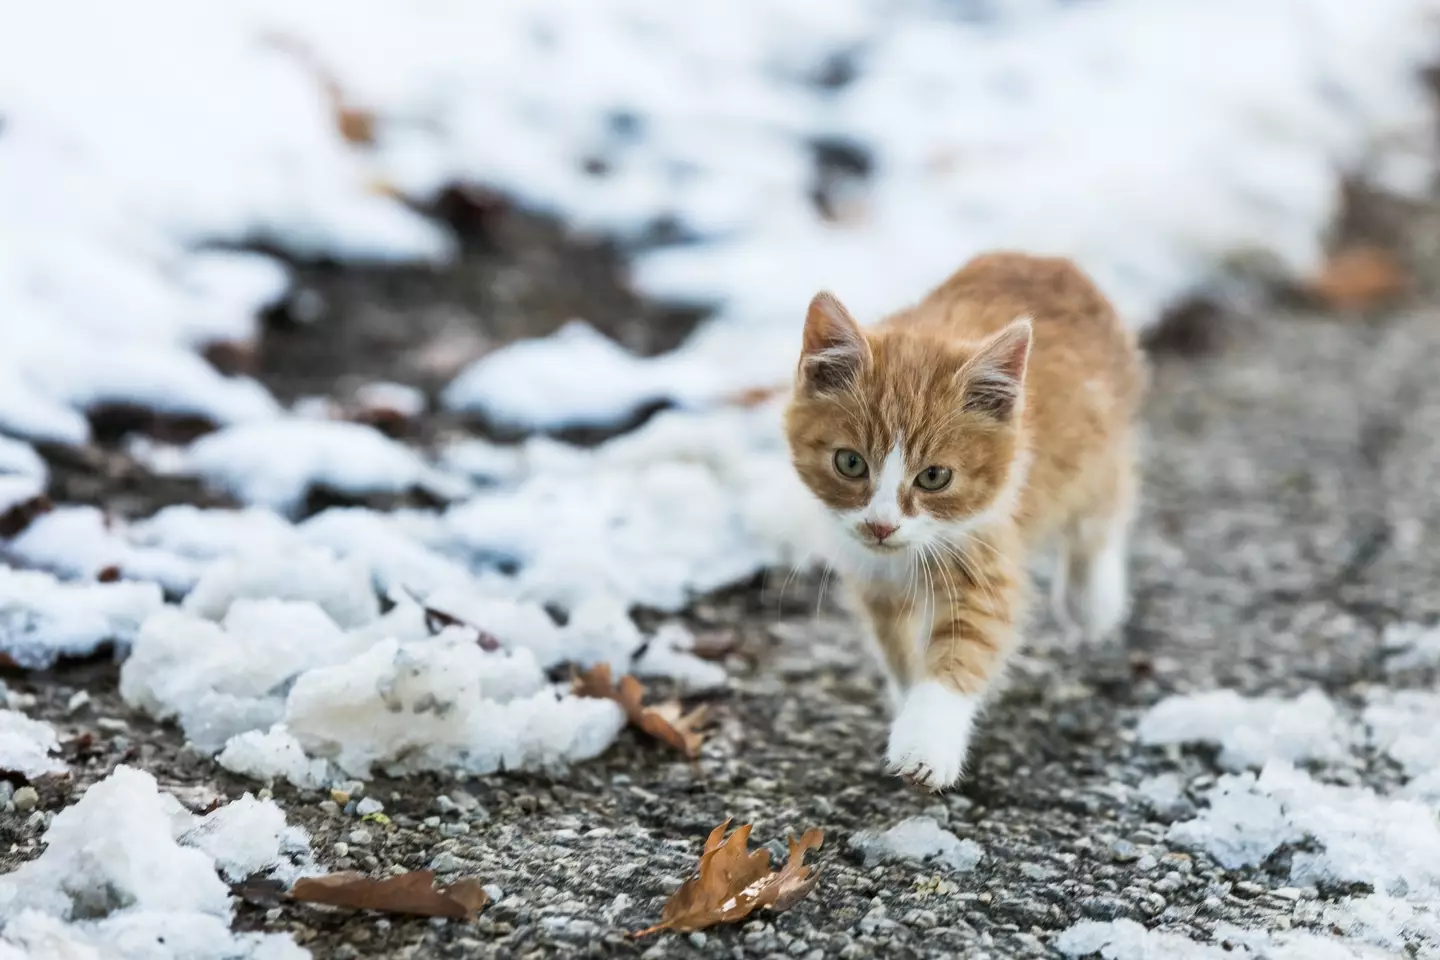 Cats could become ill after walking on grit.